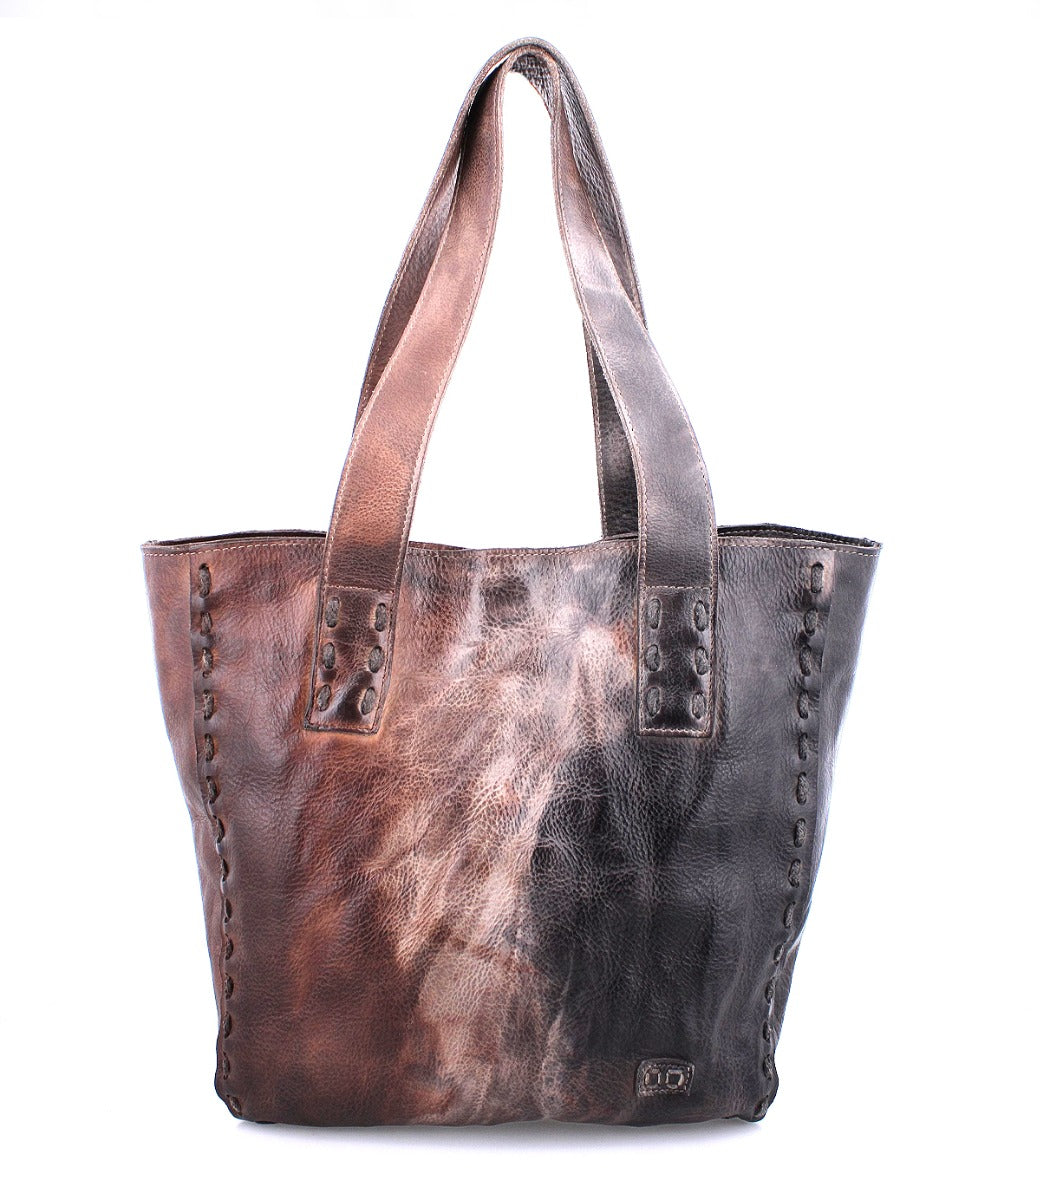 A brown and black Stevie leather tote bag by Bed Stu.